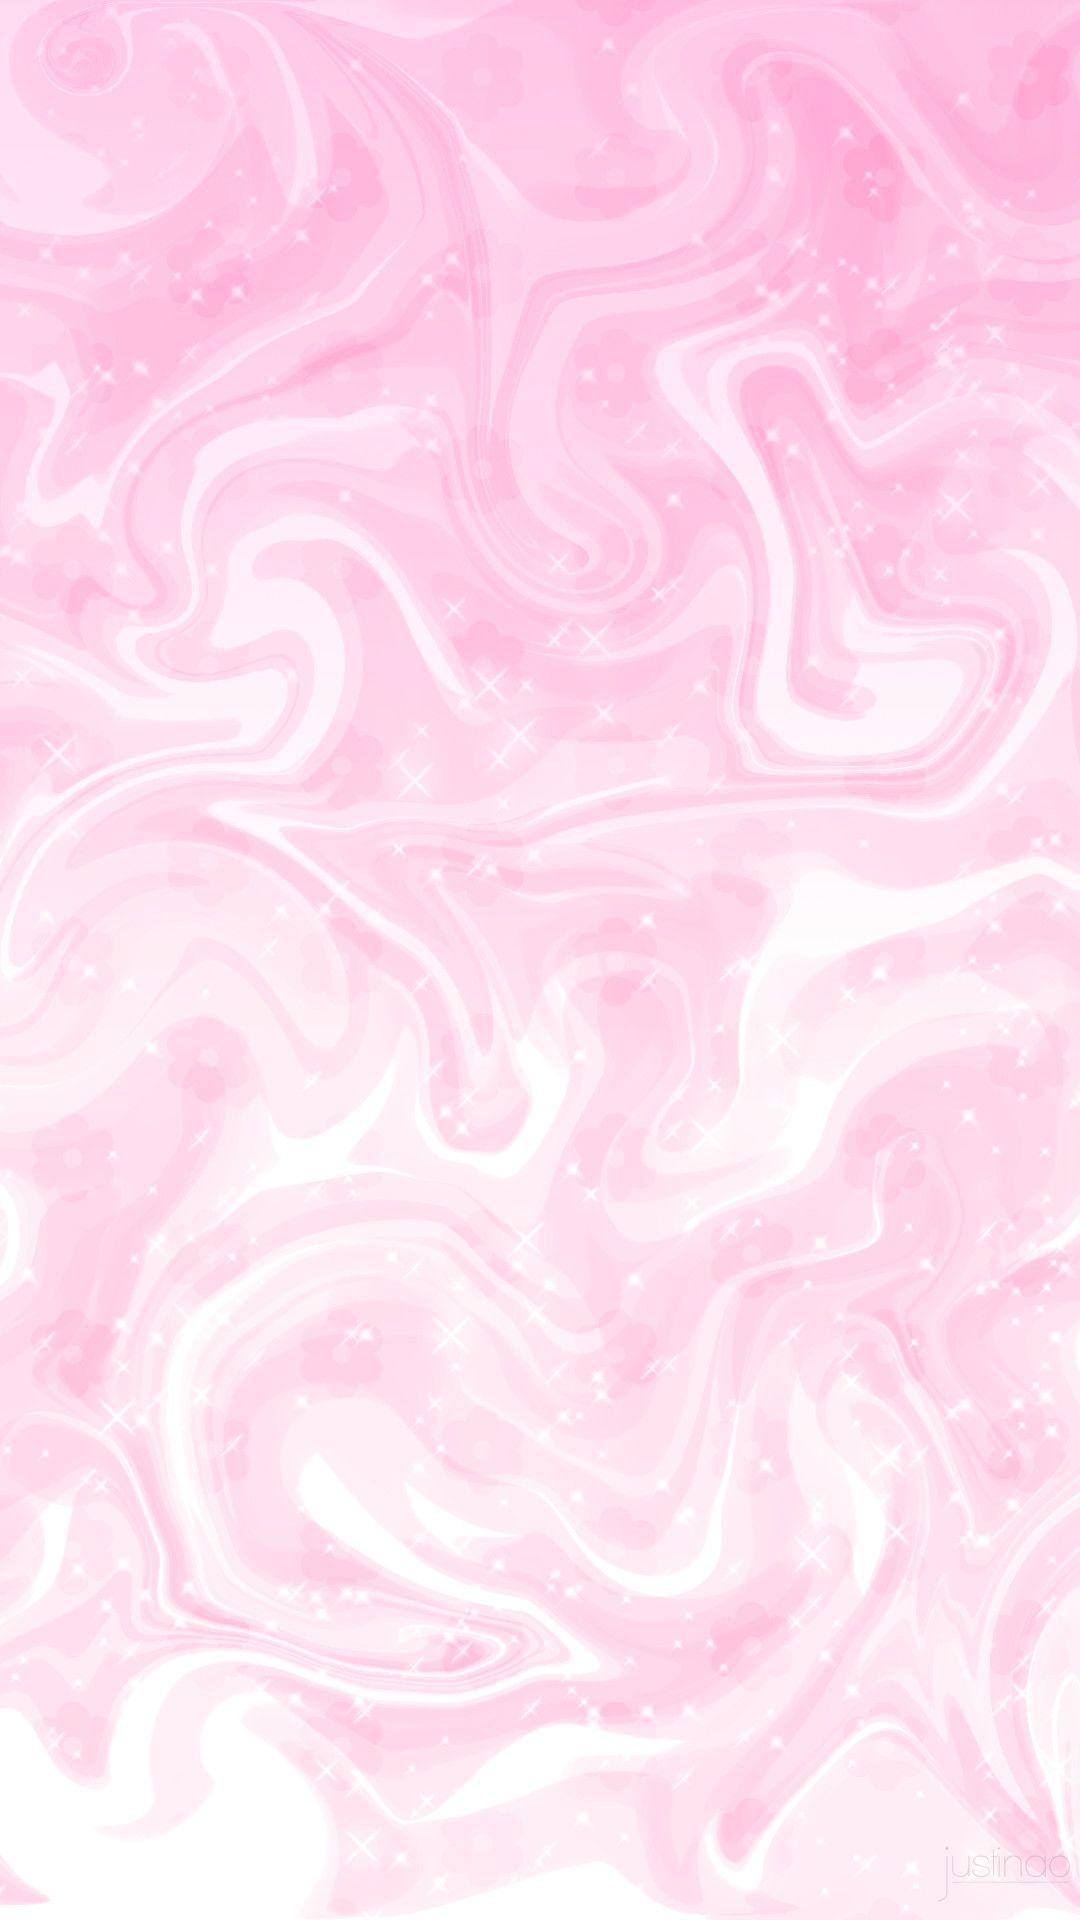 Aesthetic Backgrounds Pink Marble Check Out Our Marble Background